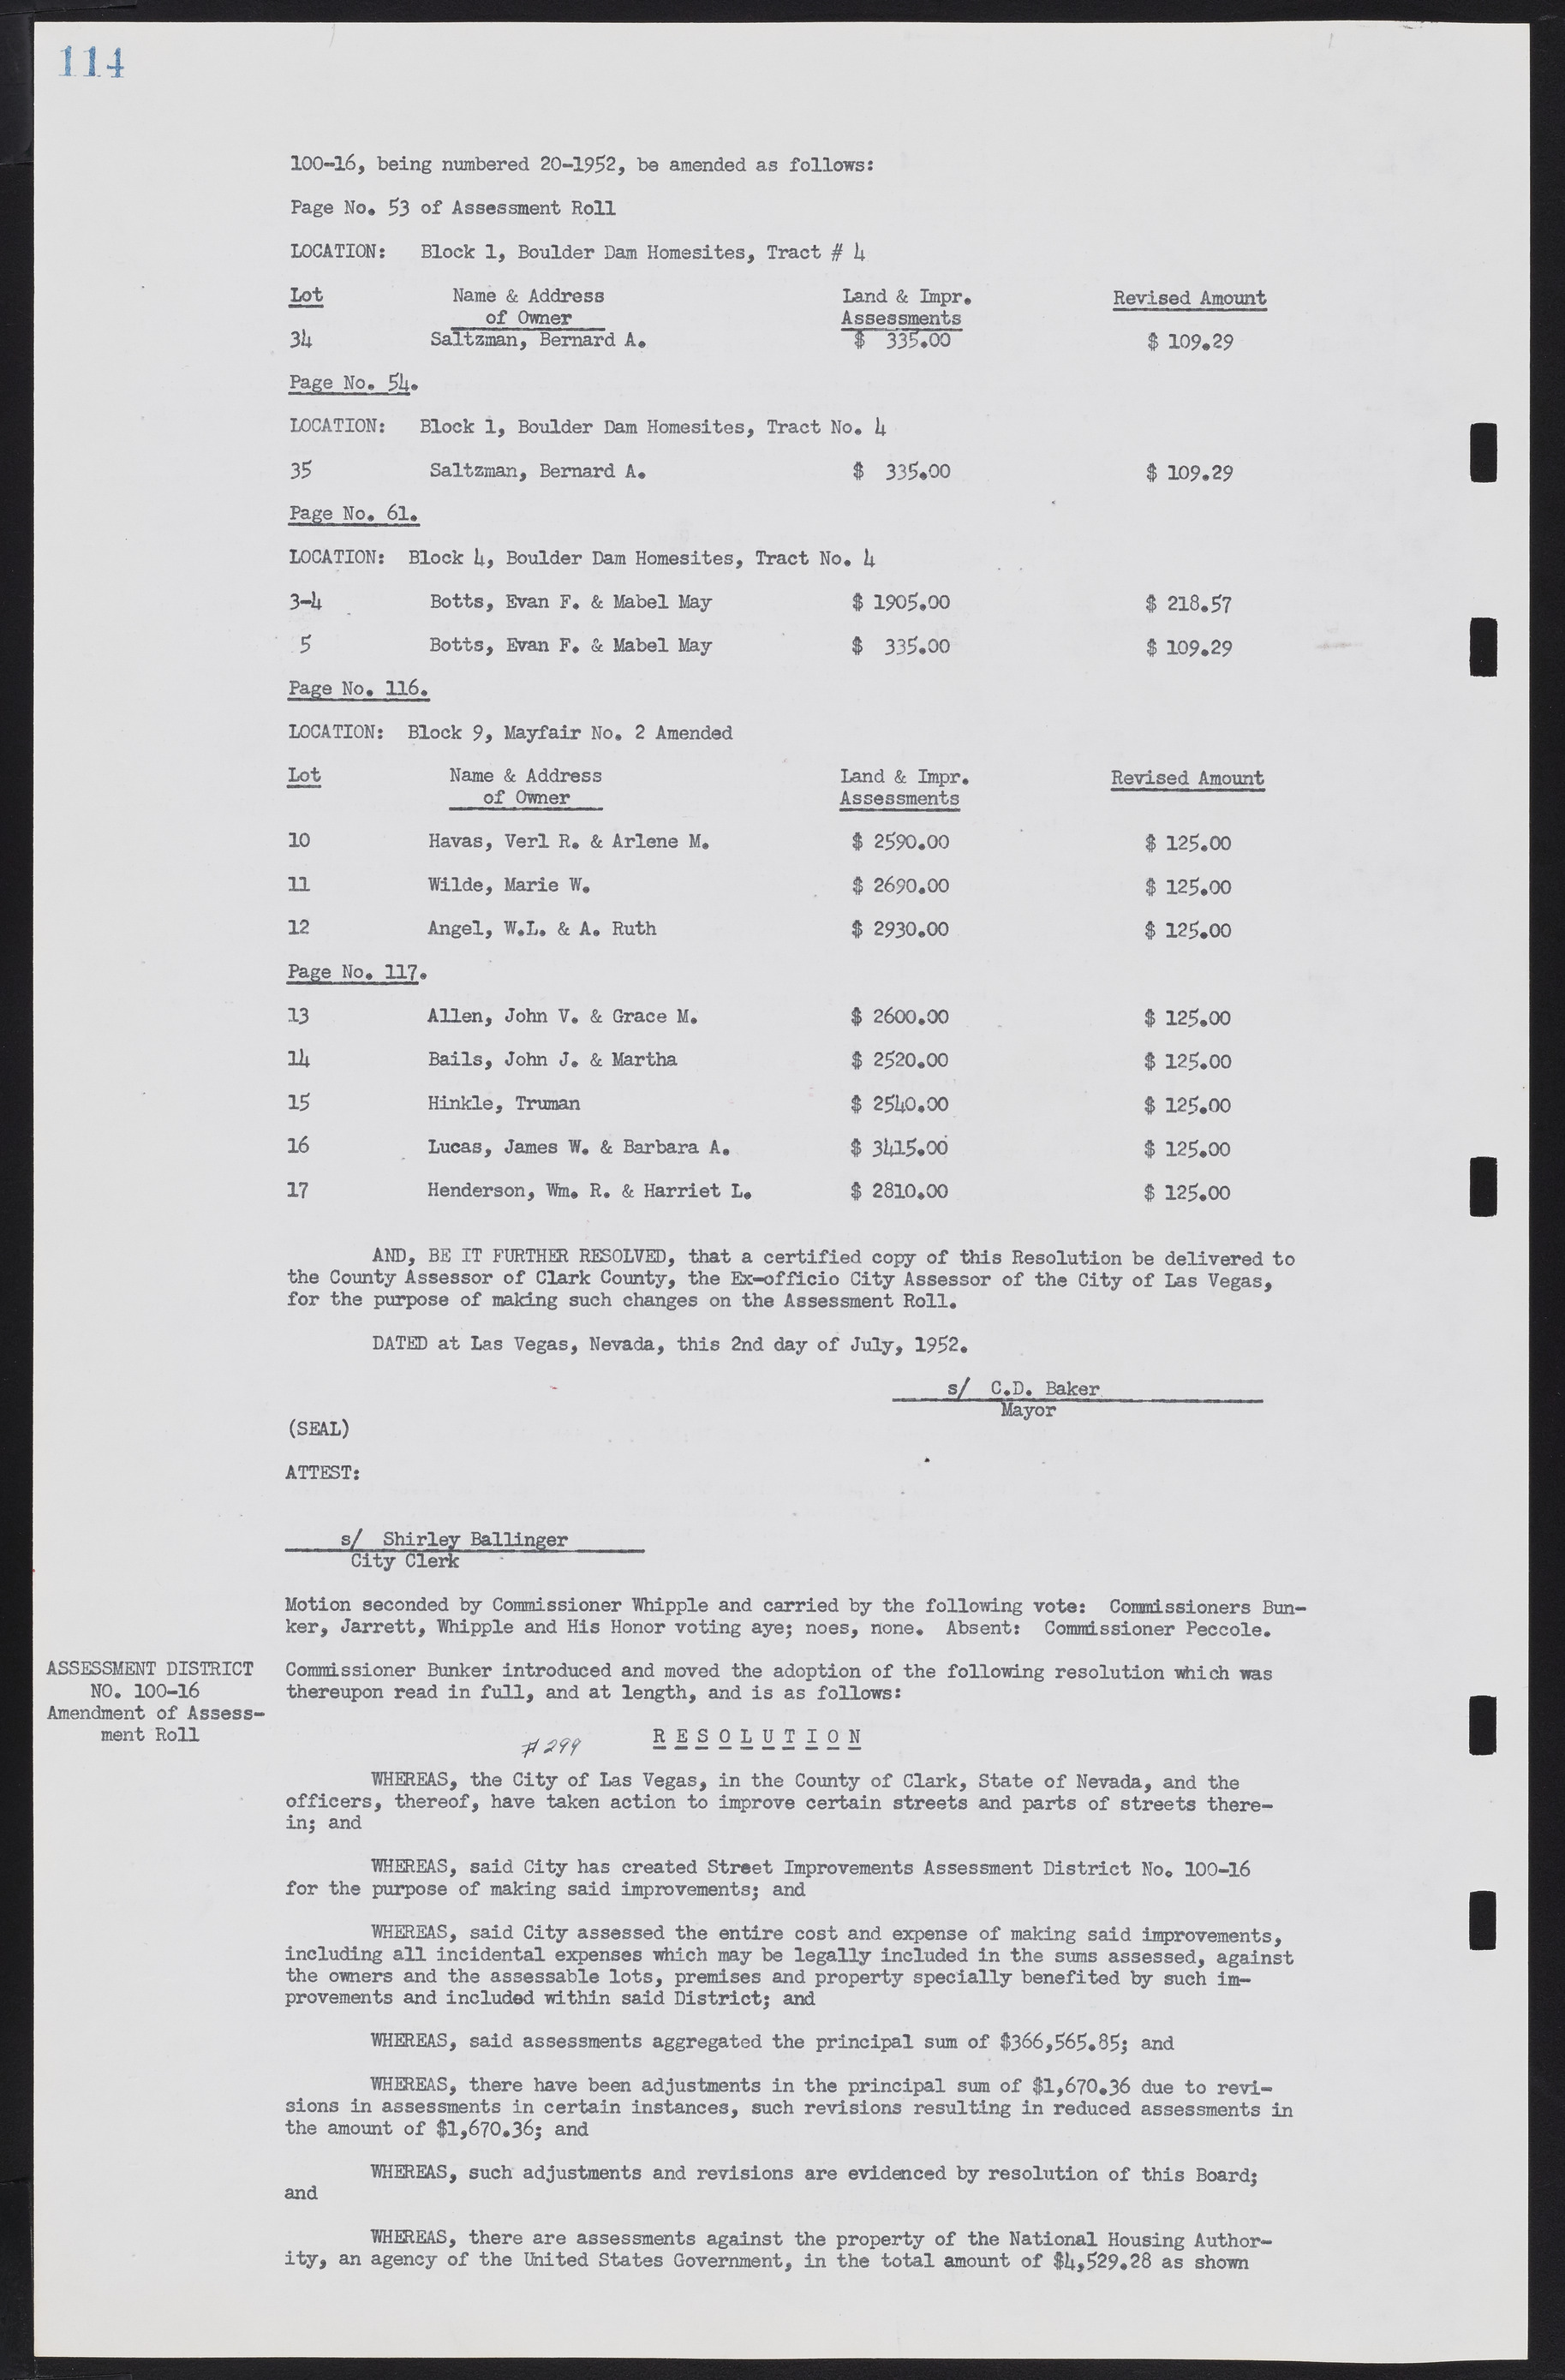 Las Vegas City Commission Minutes, May 26, 1952 to February 17, 1954, lvc000008-120